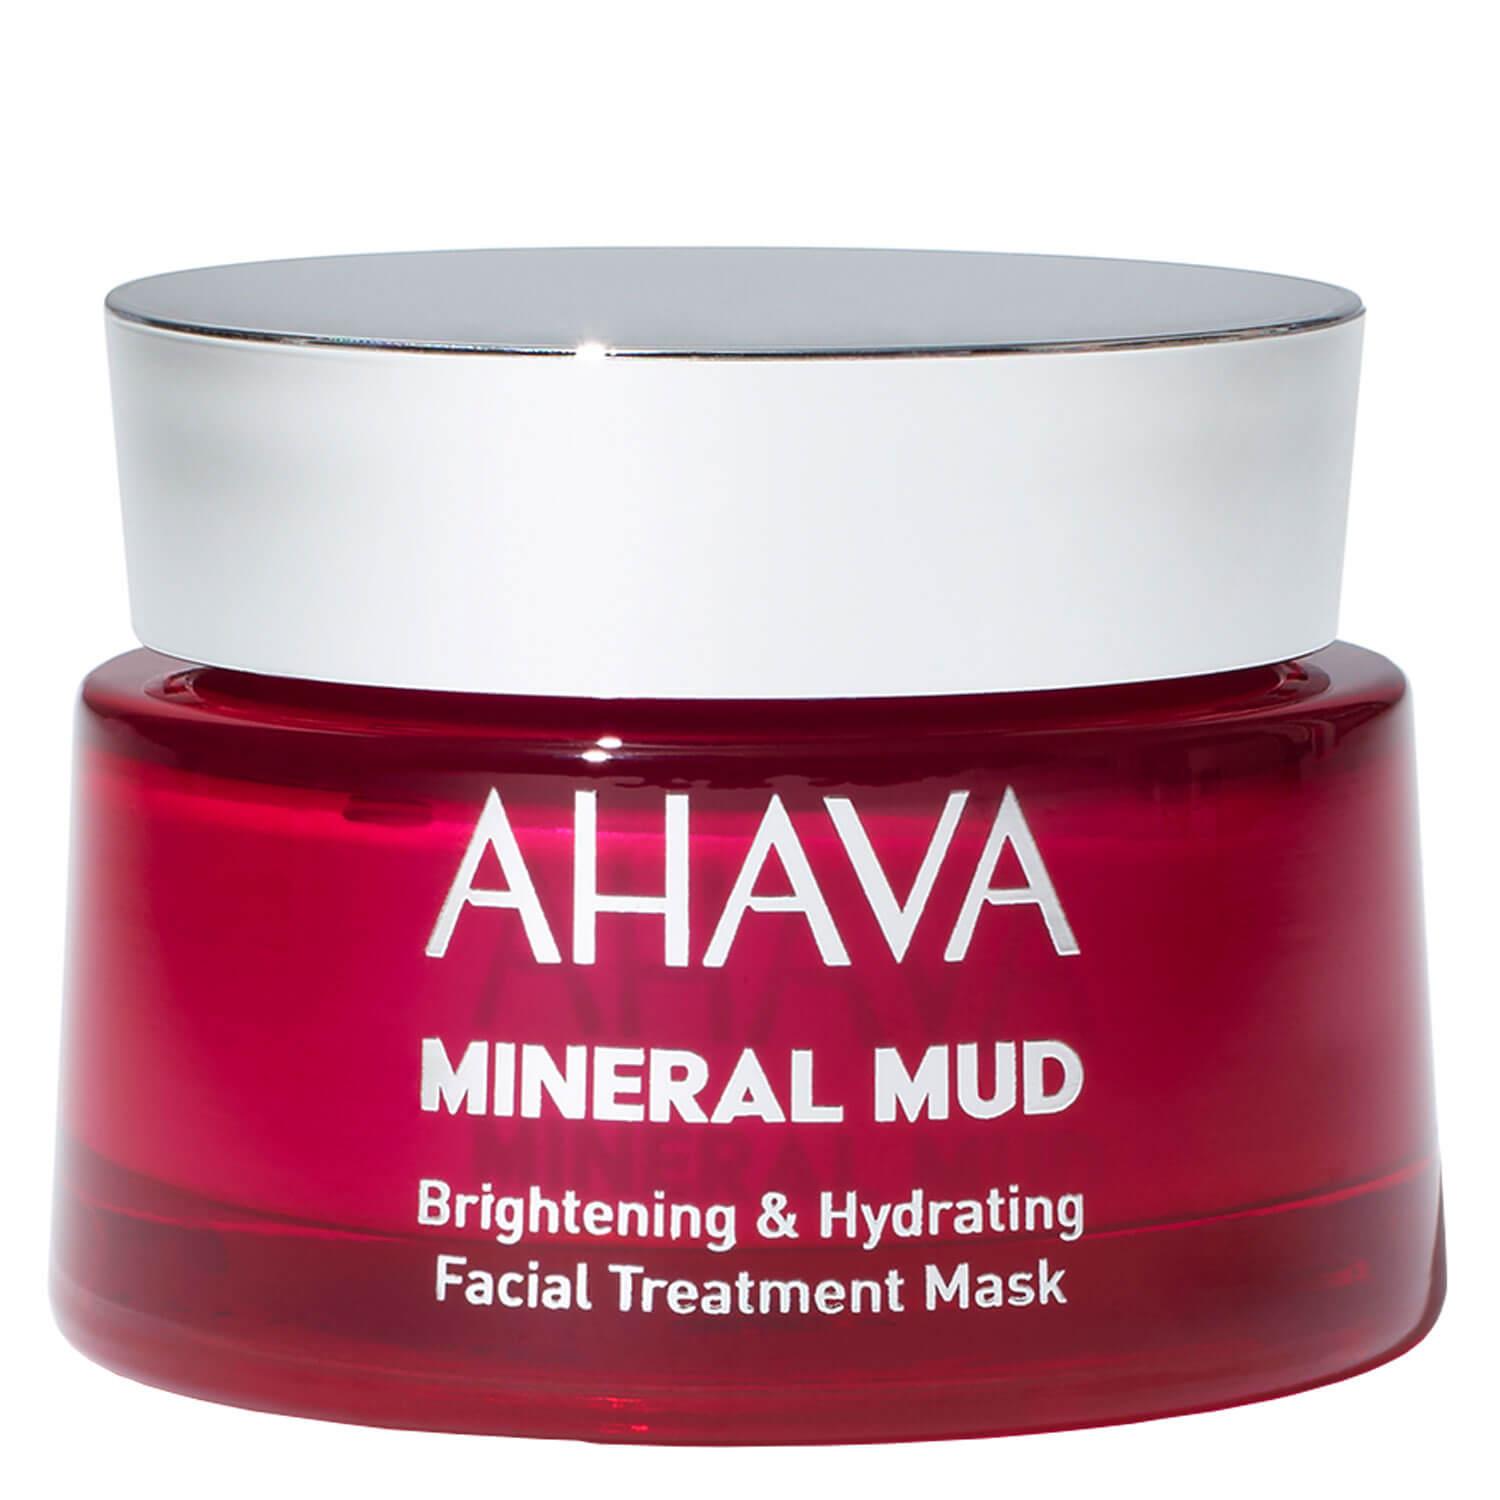 Mineral Mud - Brightening & Hydrating Facial Treatment Mask